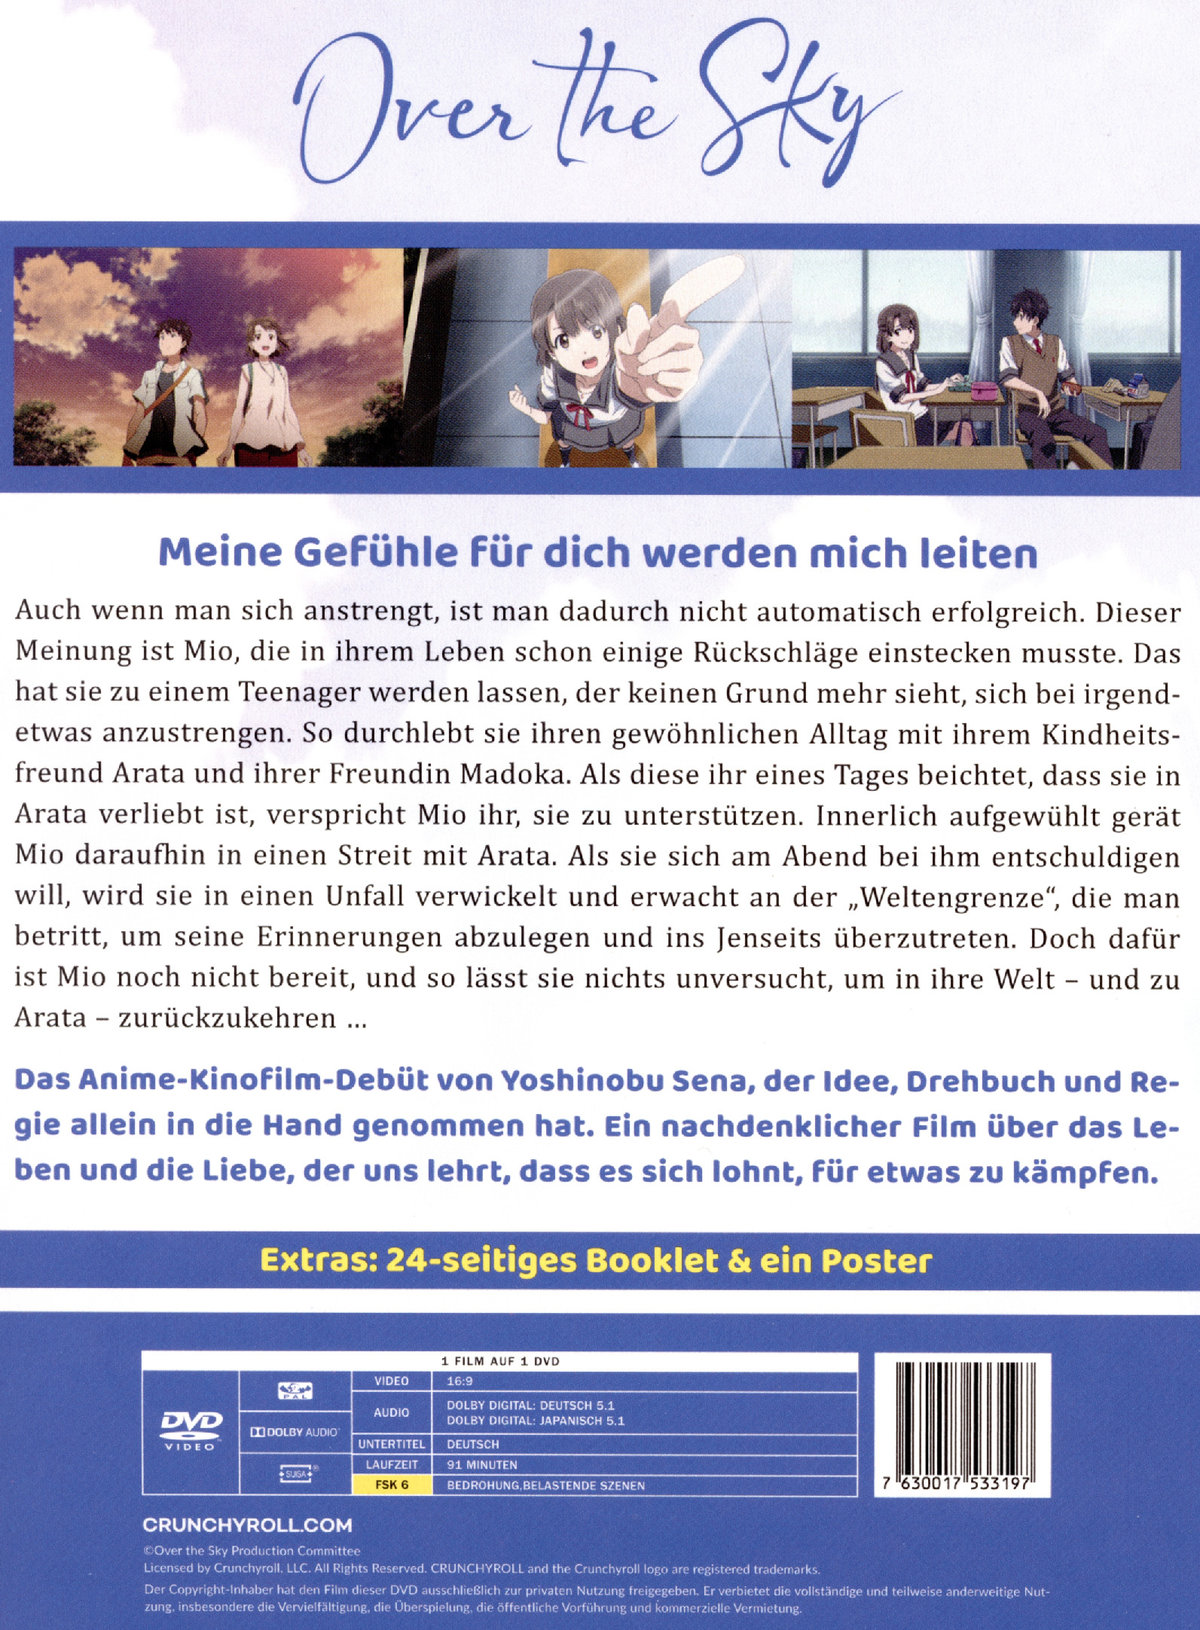 Over the Sky - The Movie  (DVD)